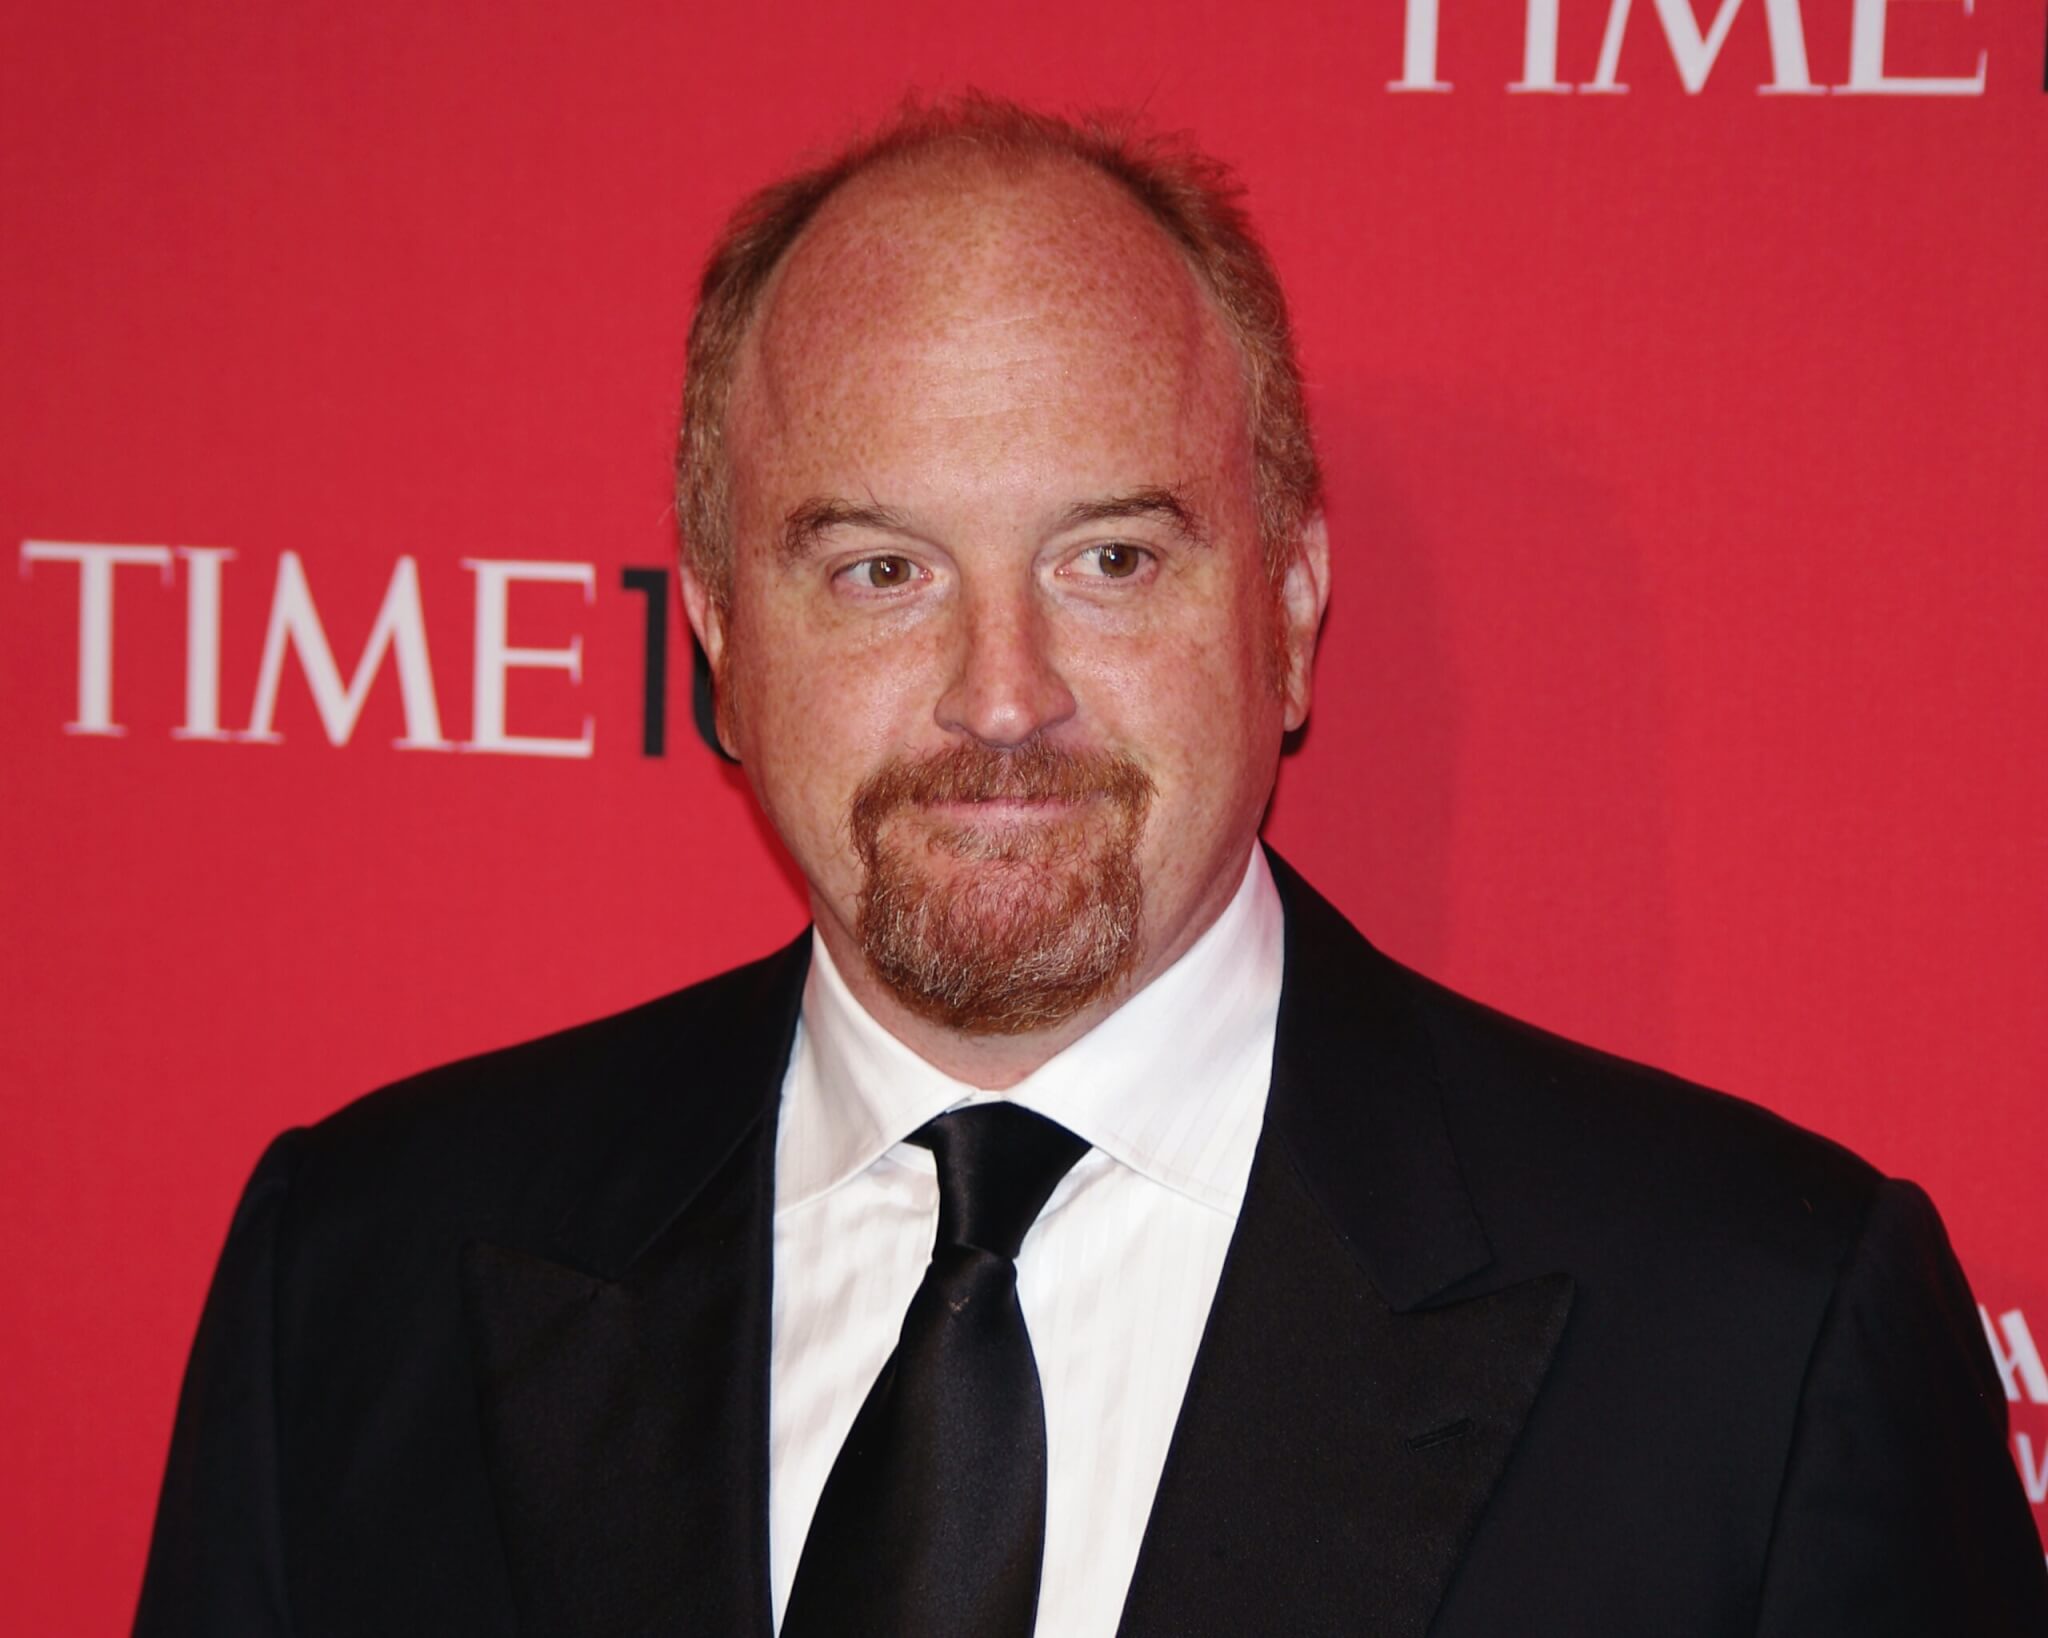 Louis C.K. just released his first new stand-up special in years